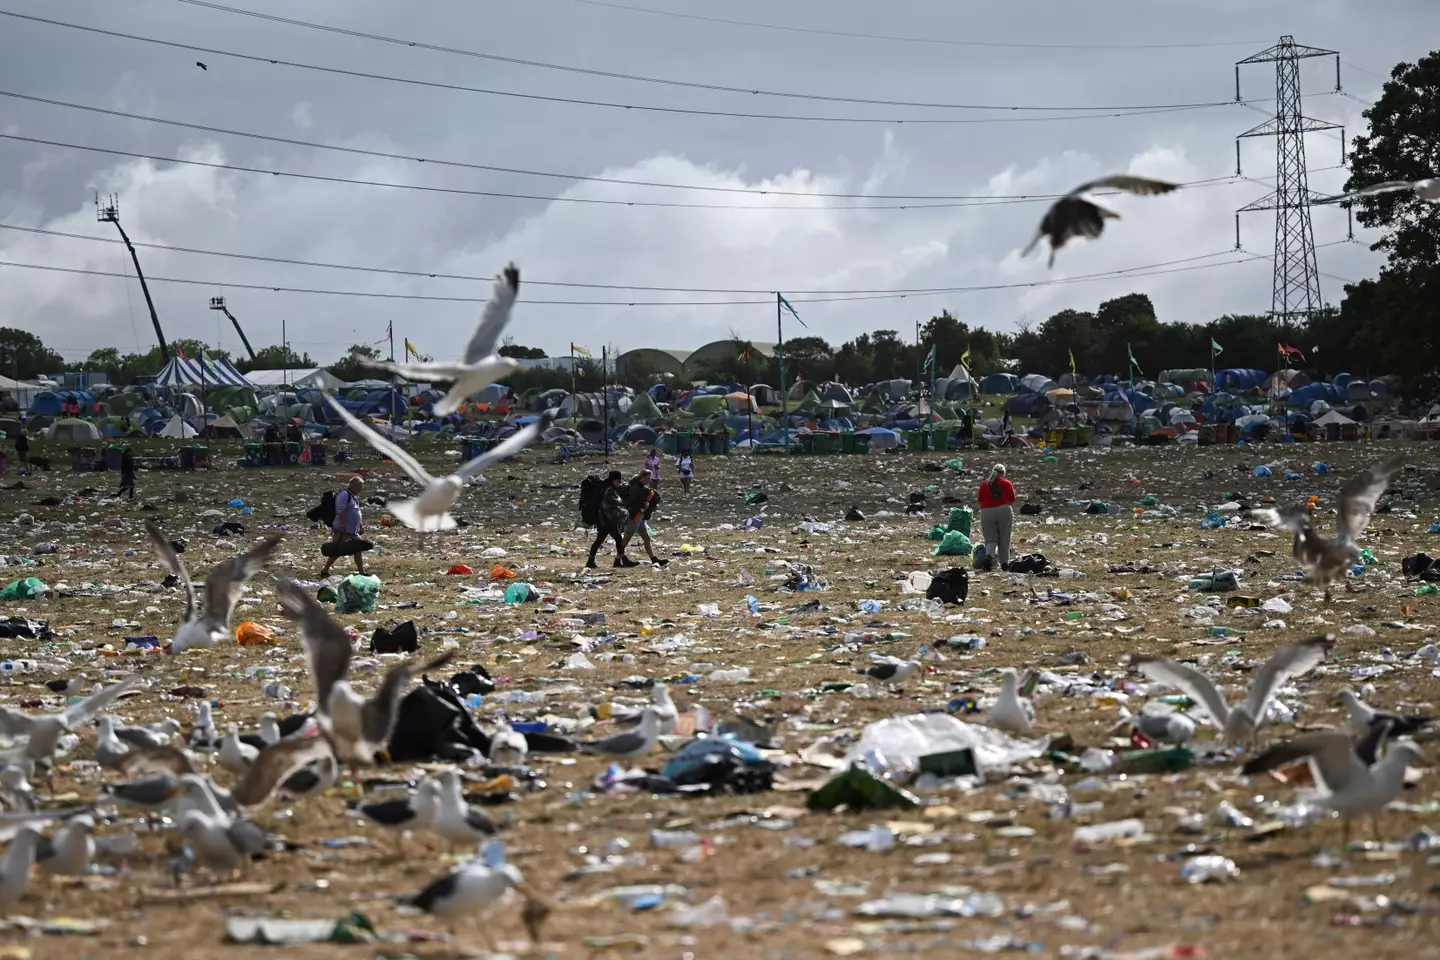 Next summer thousands of people are going to head for Glastonbury.